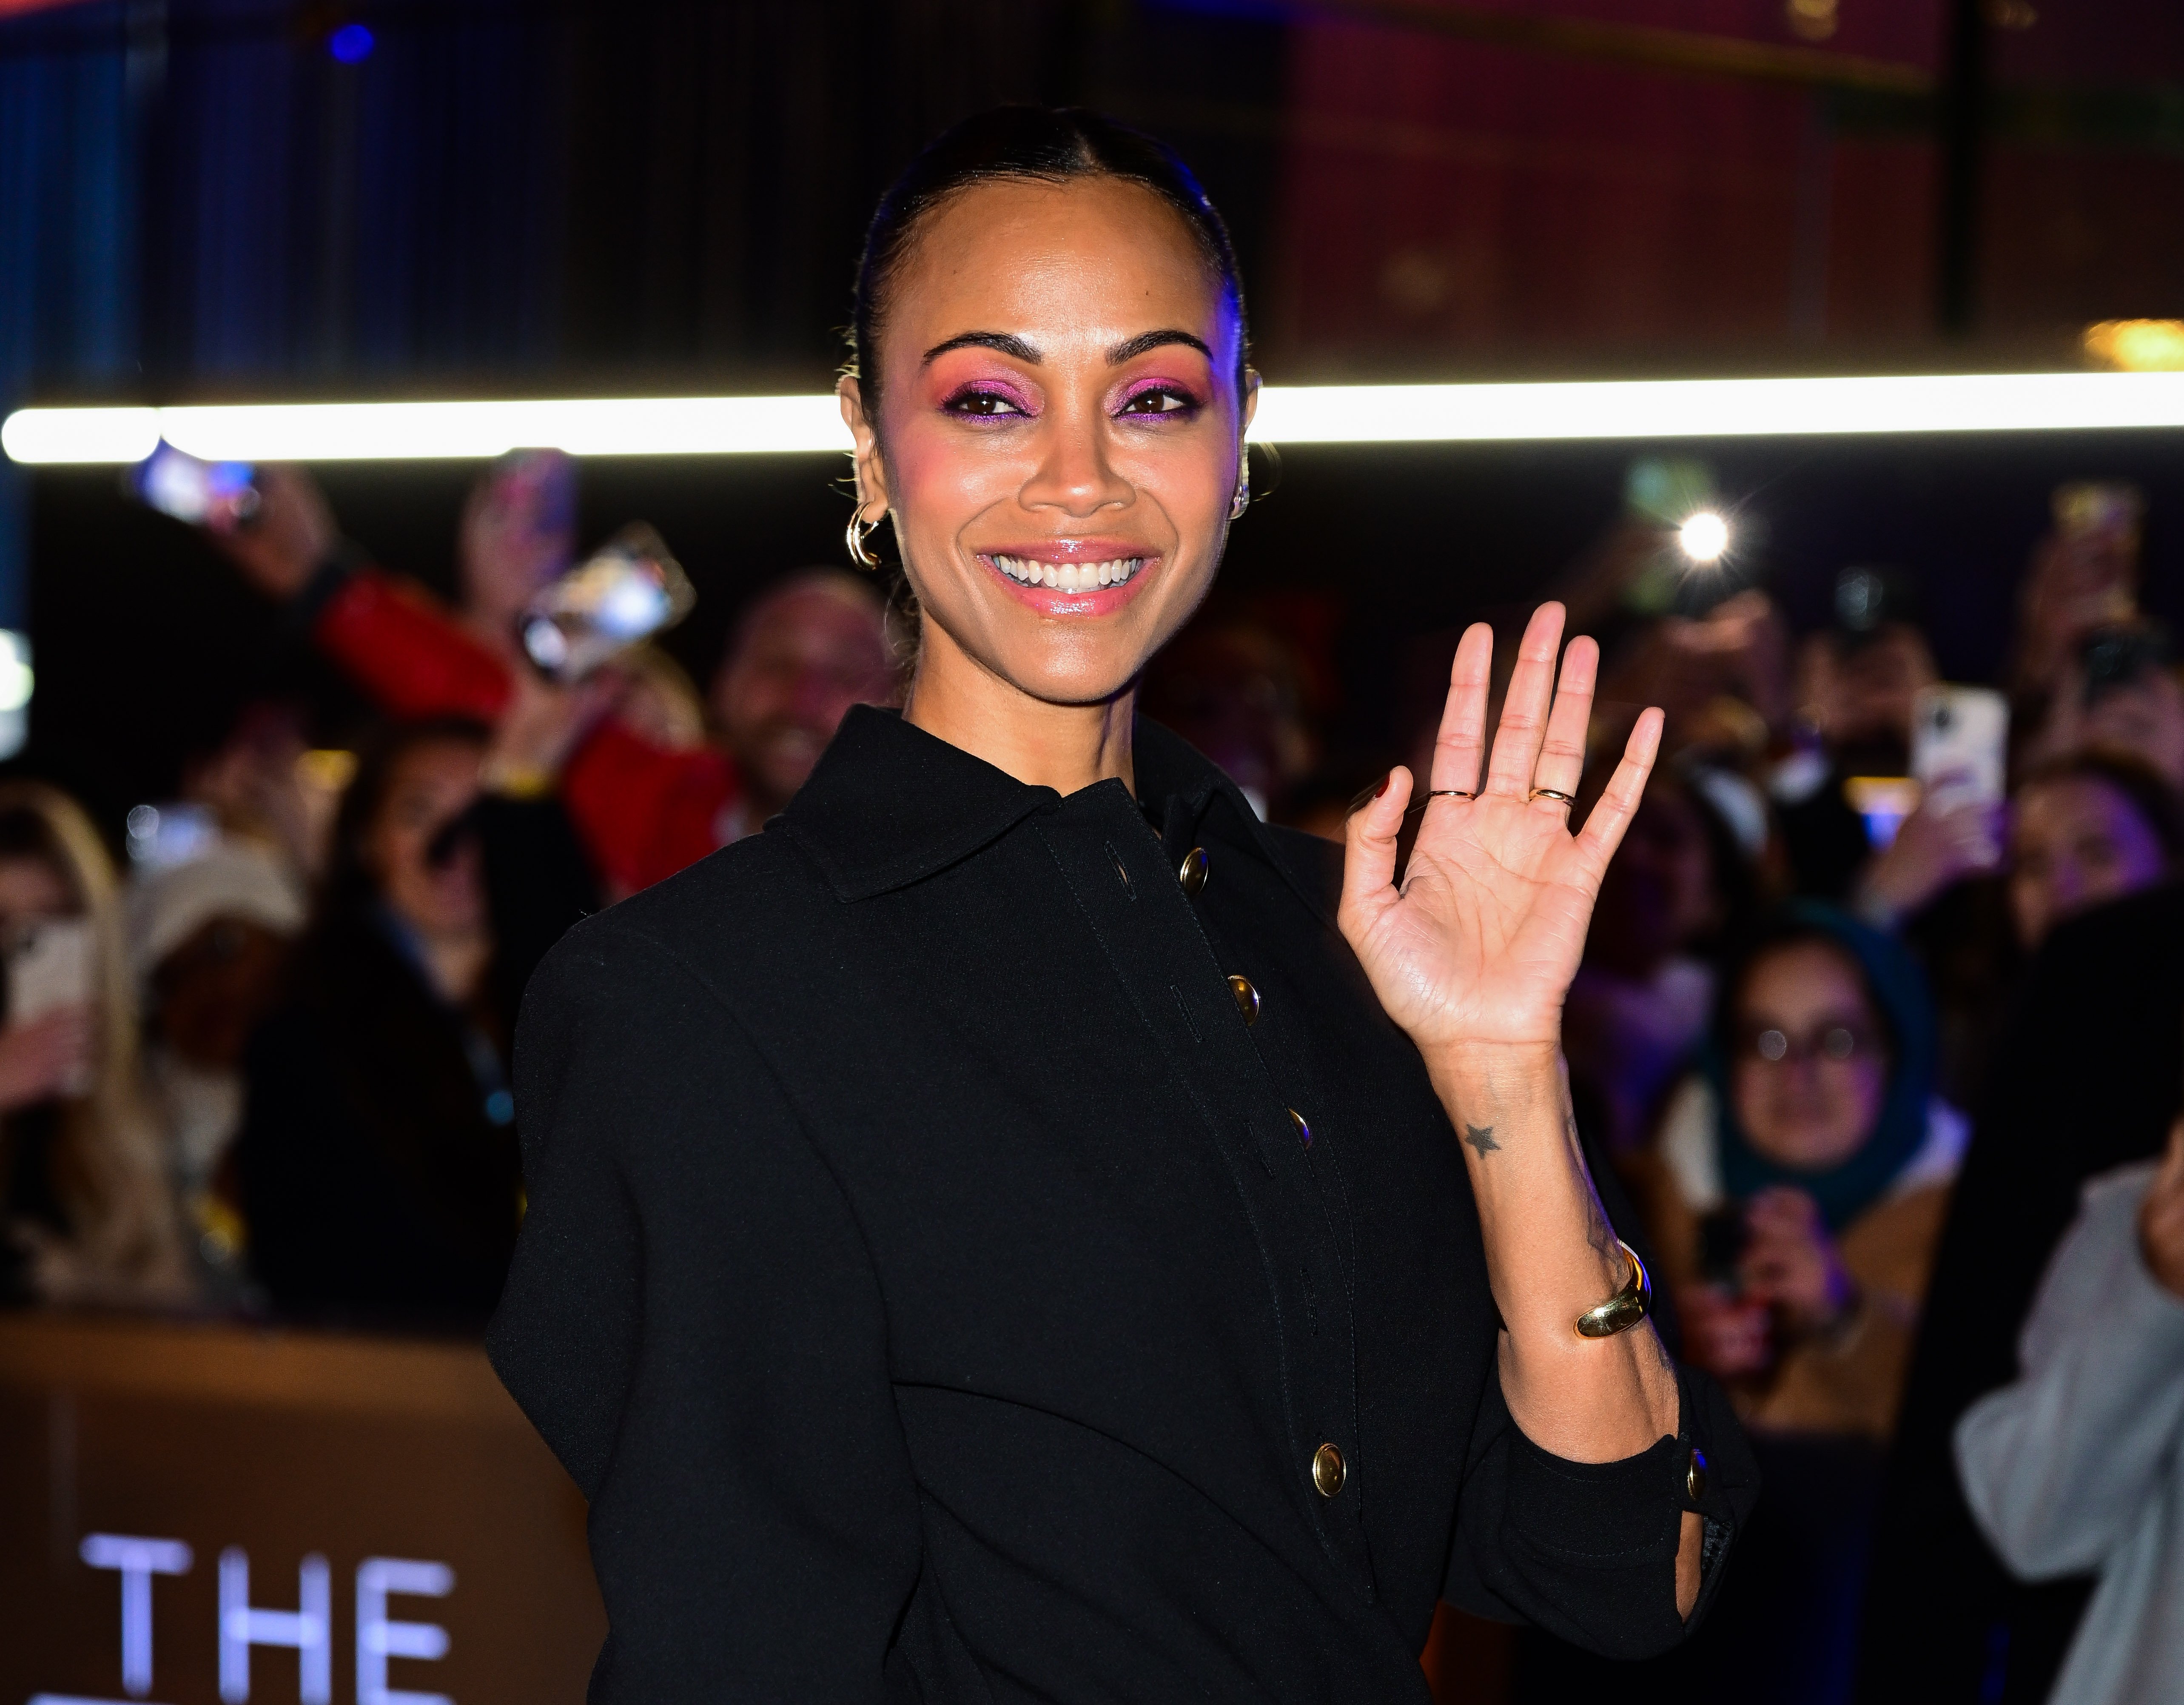 Zoe Saldana arrives at the film premiere of "The Adam Project" on February 28, 2022, in New York City. | Source: Getty Images